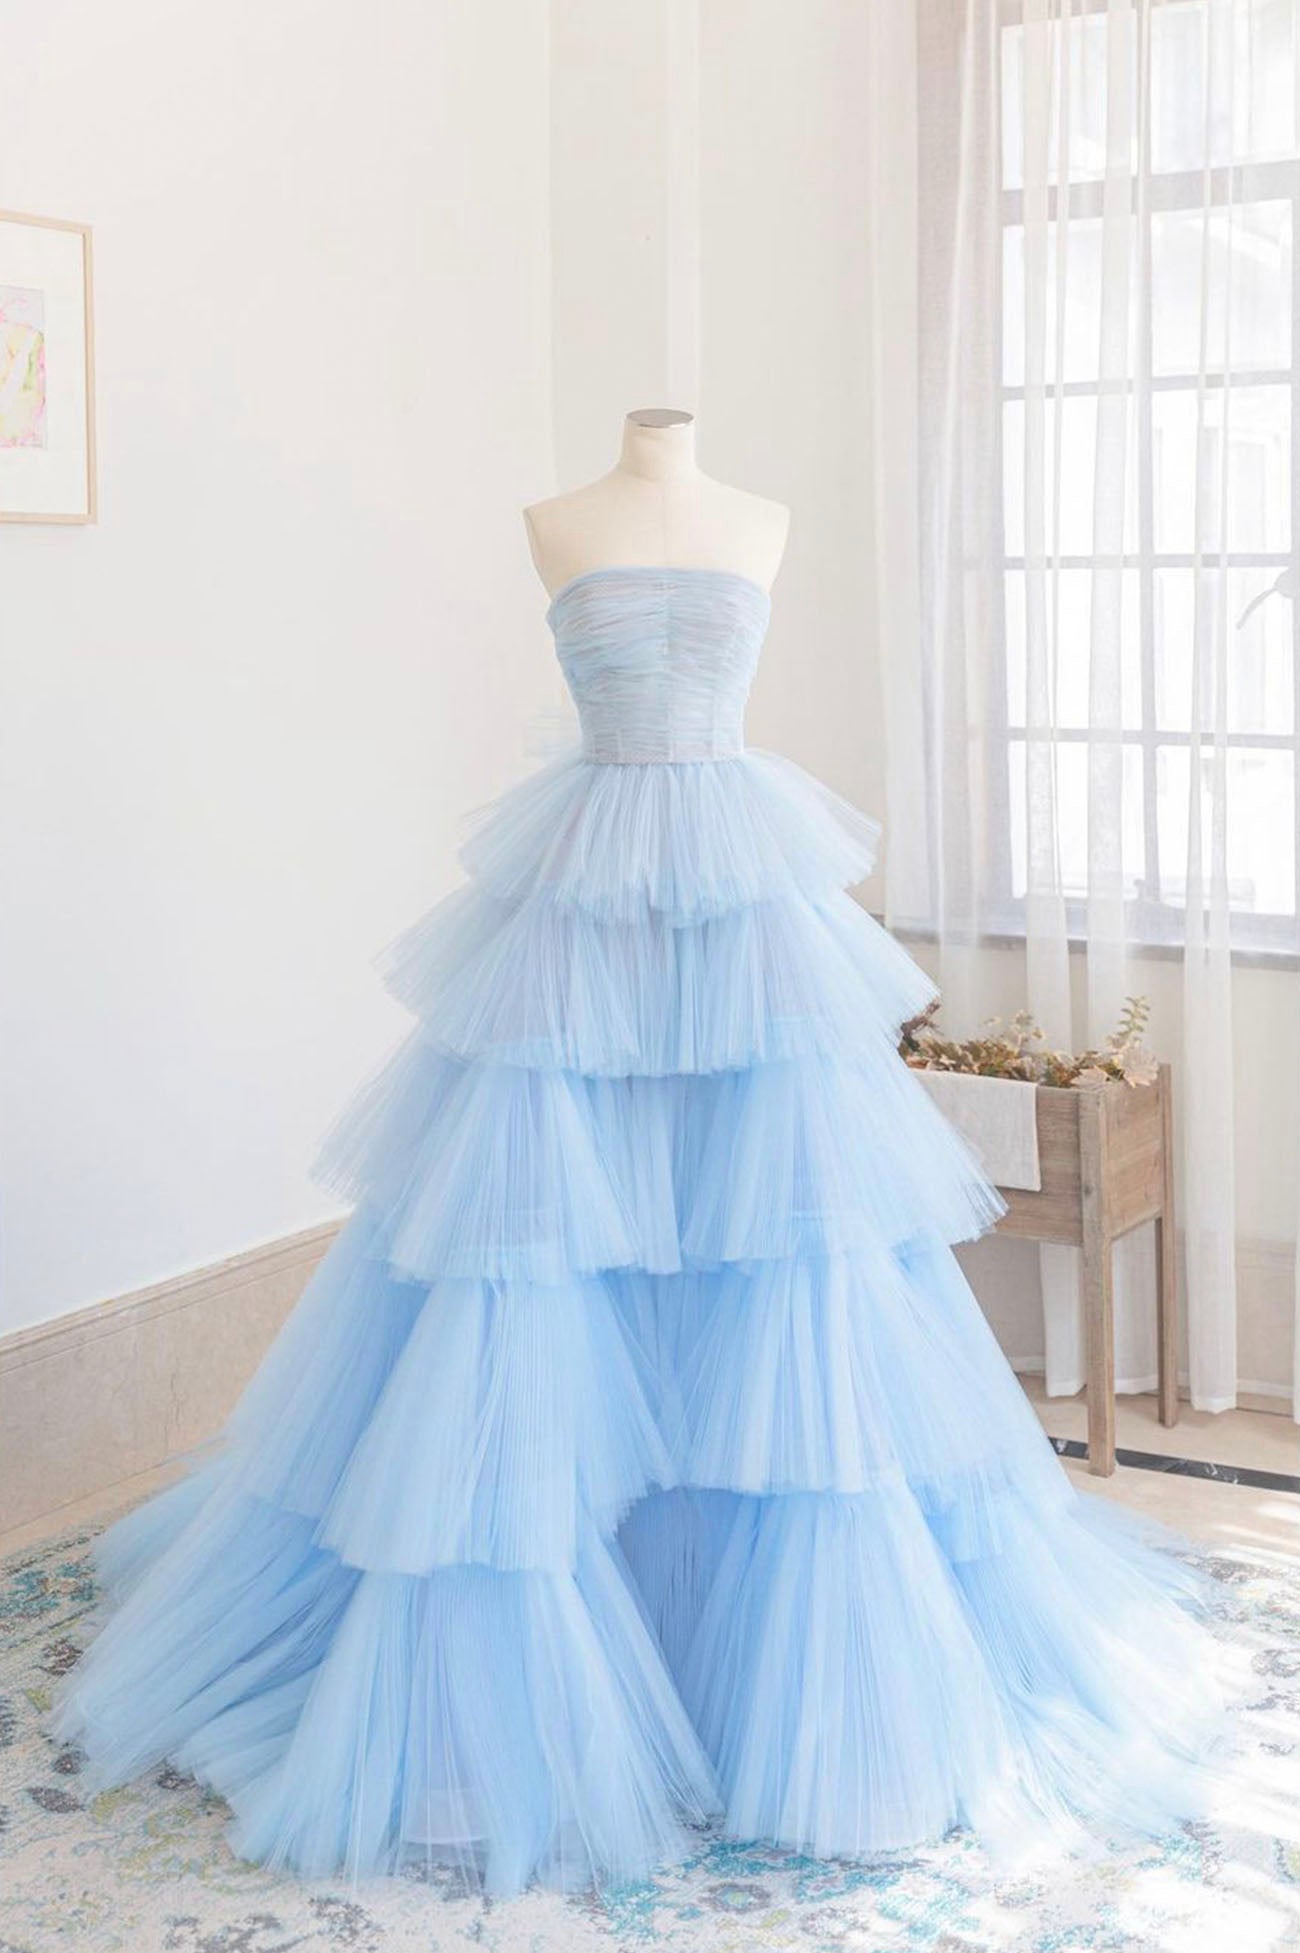 Blue Strapless Tulle Layers Long Corset Prom Dress, A-Line Evening Dress outfit, Bridesmaid Dresses Neutral